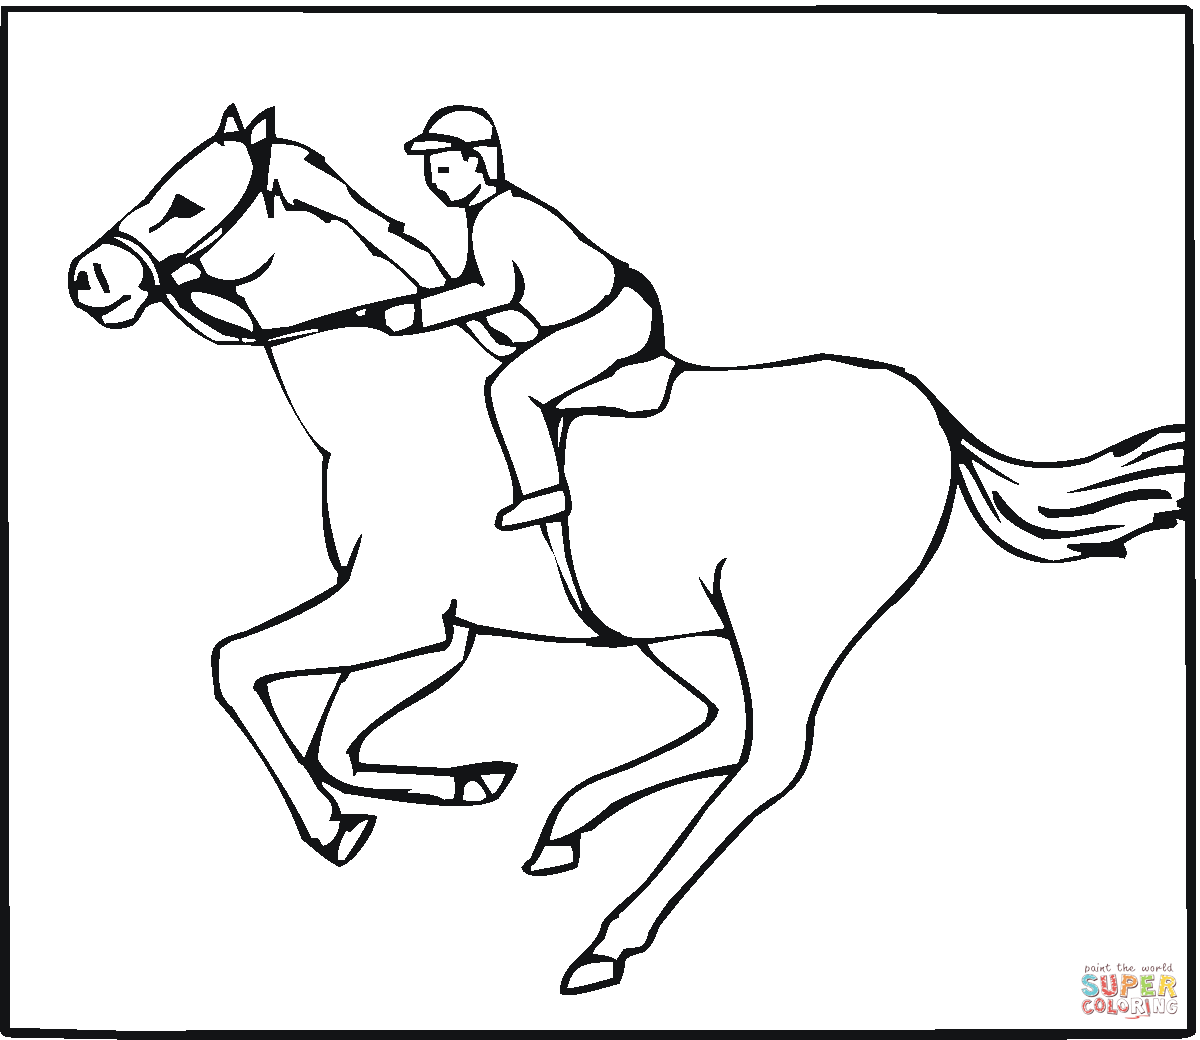 Race Horse coloring page | Free Printable Coloring Pages